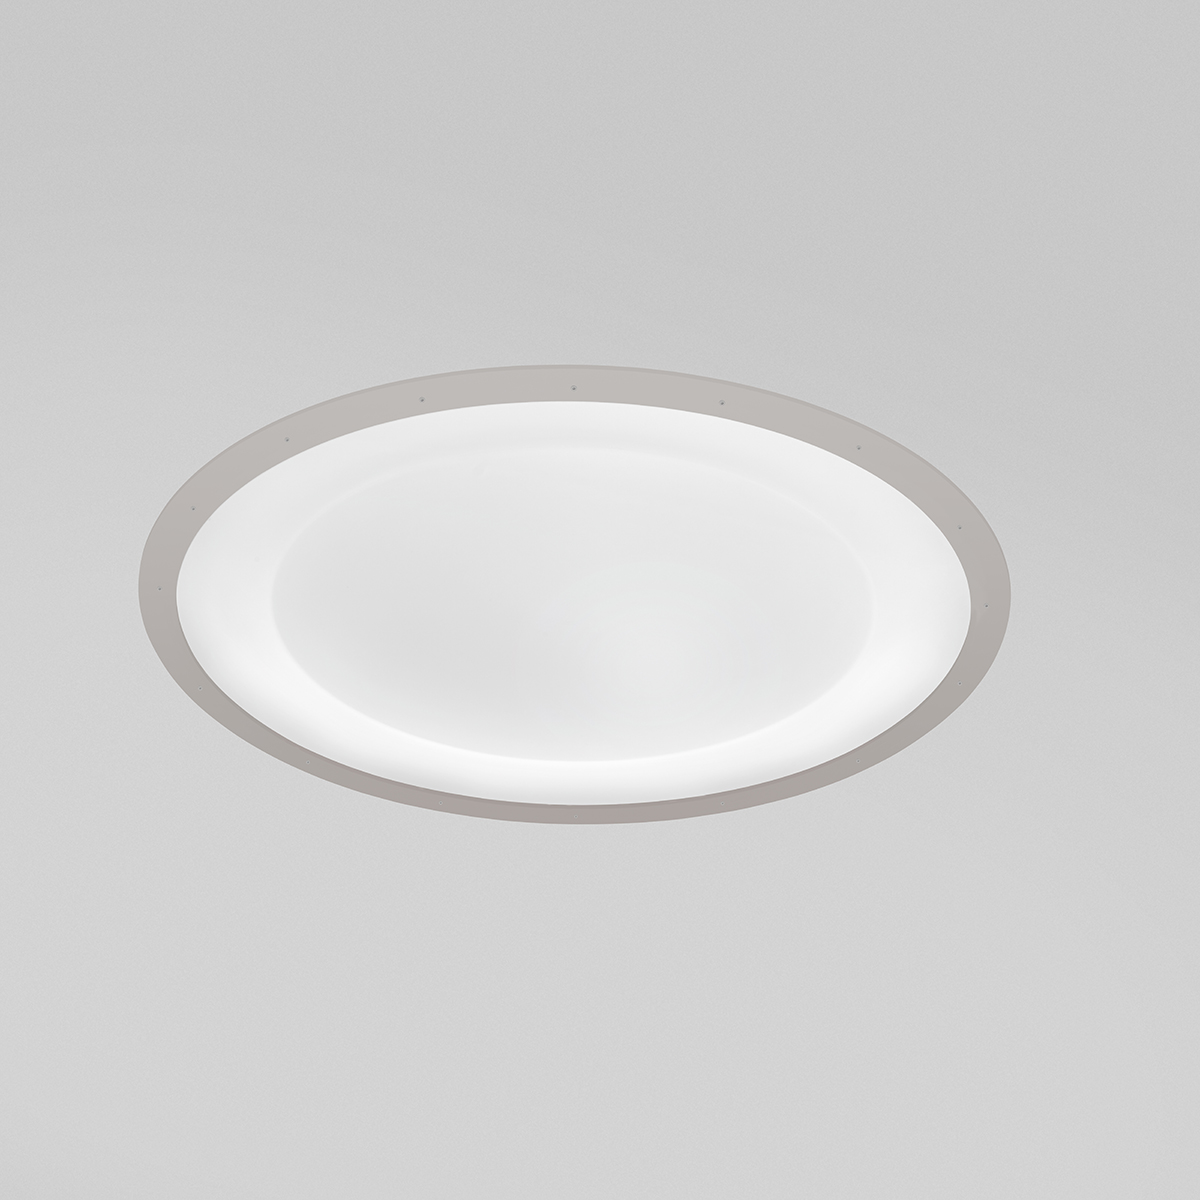 A round, recessed ceiling luminaire with a concave dome lens